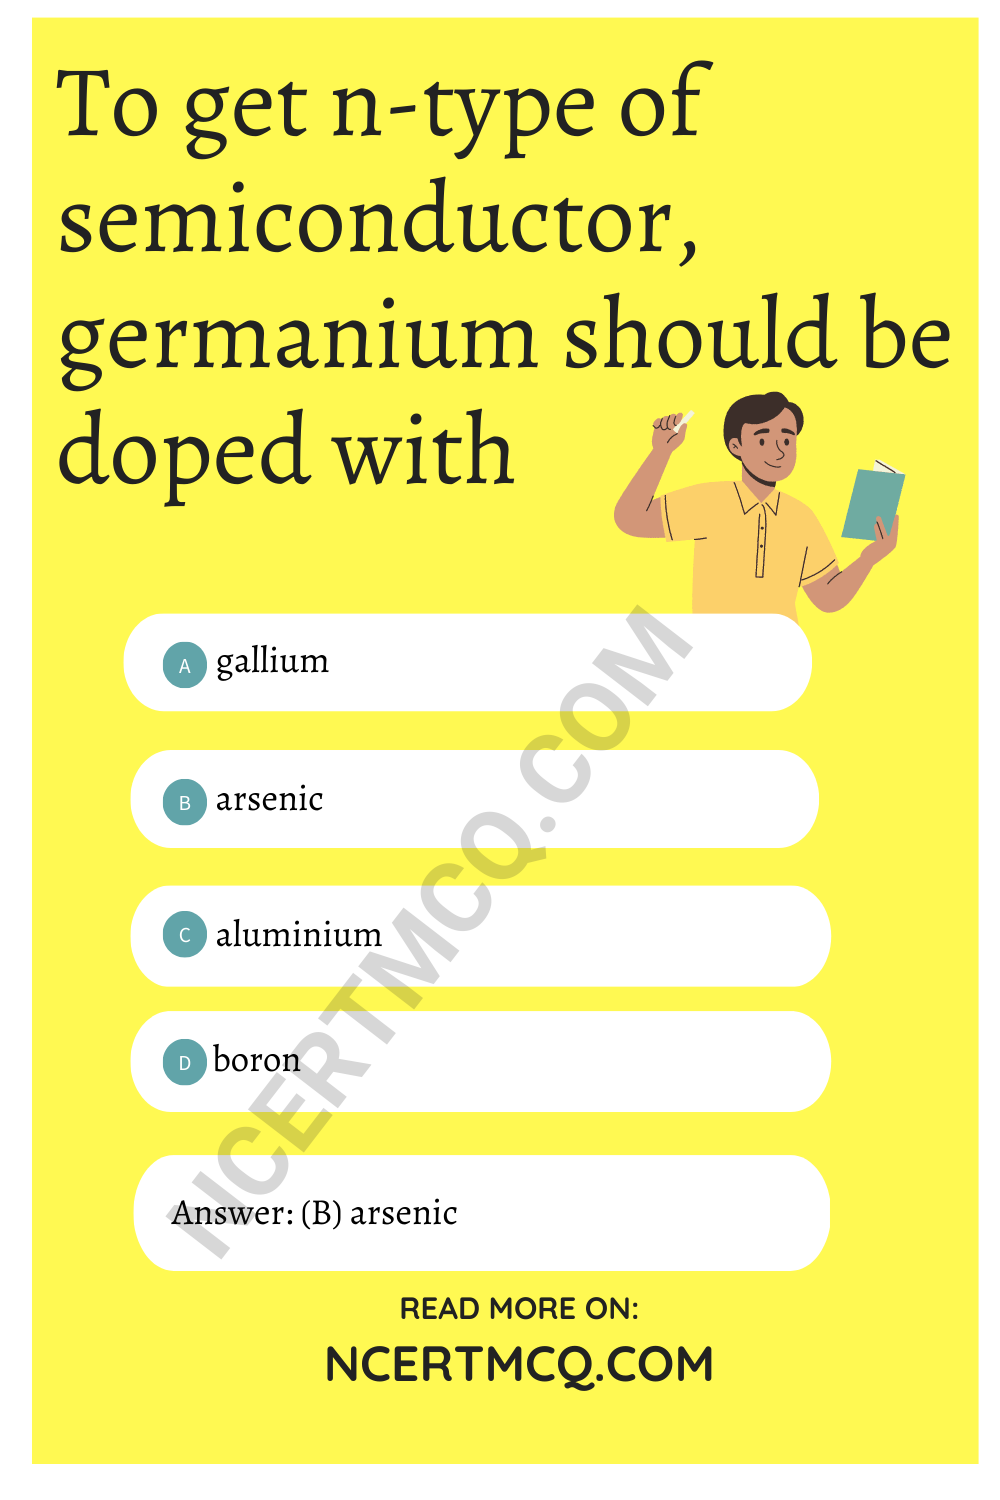 To get n-type of semiconductor, germanium should be doped with